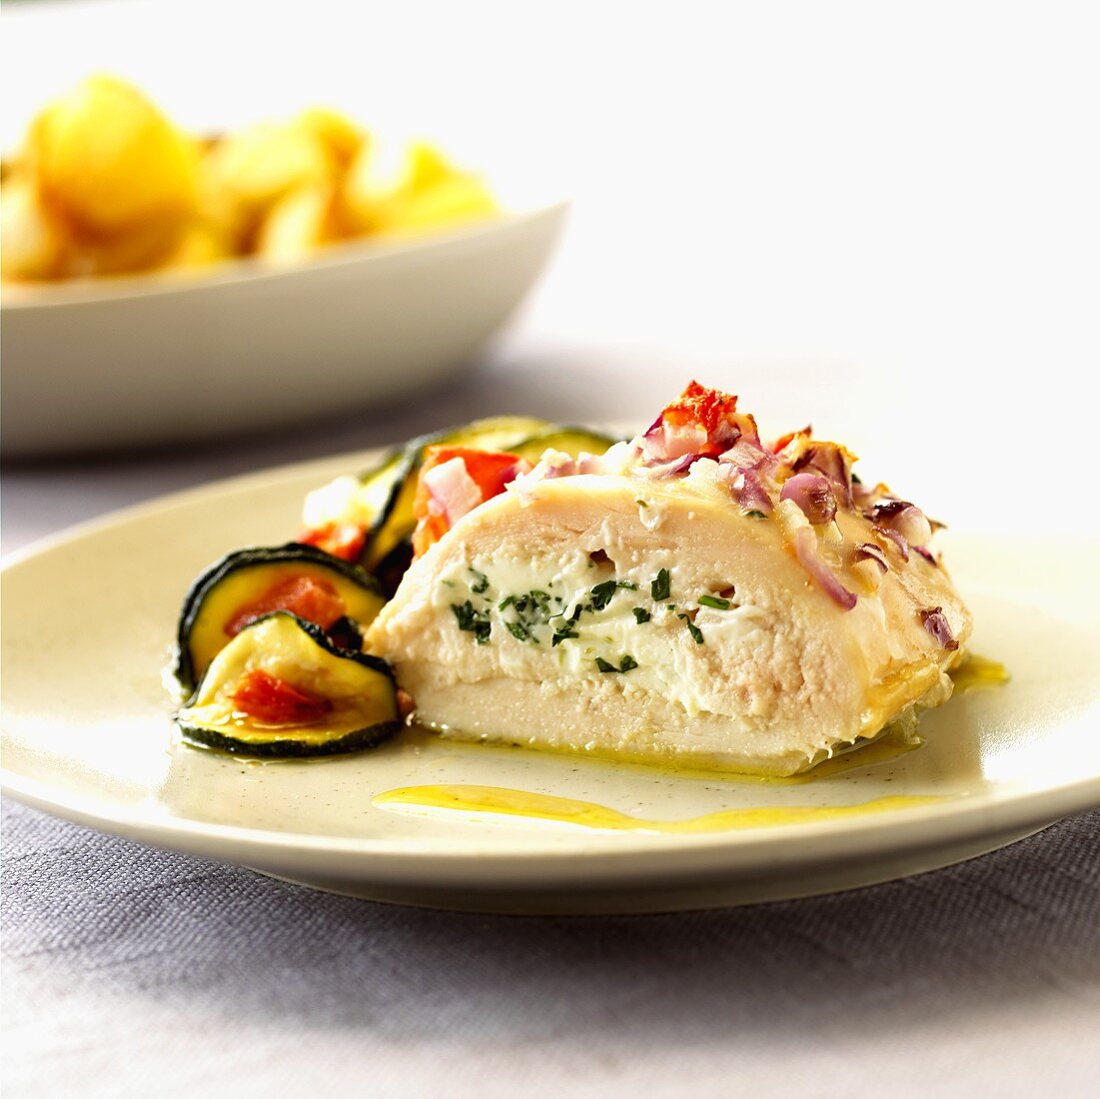 Stuffed chicken breast with courgettes